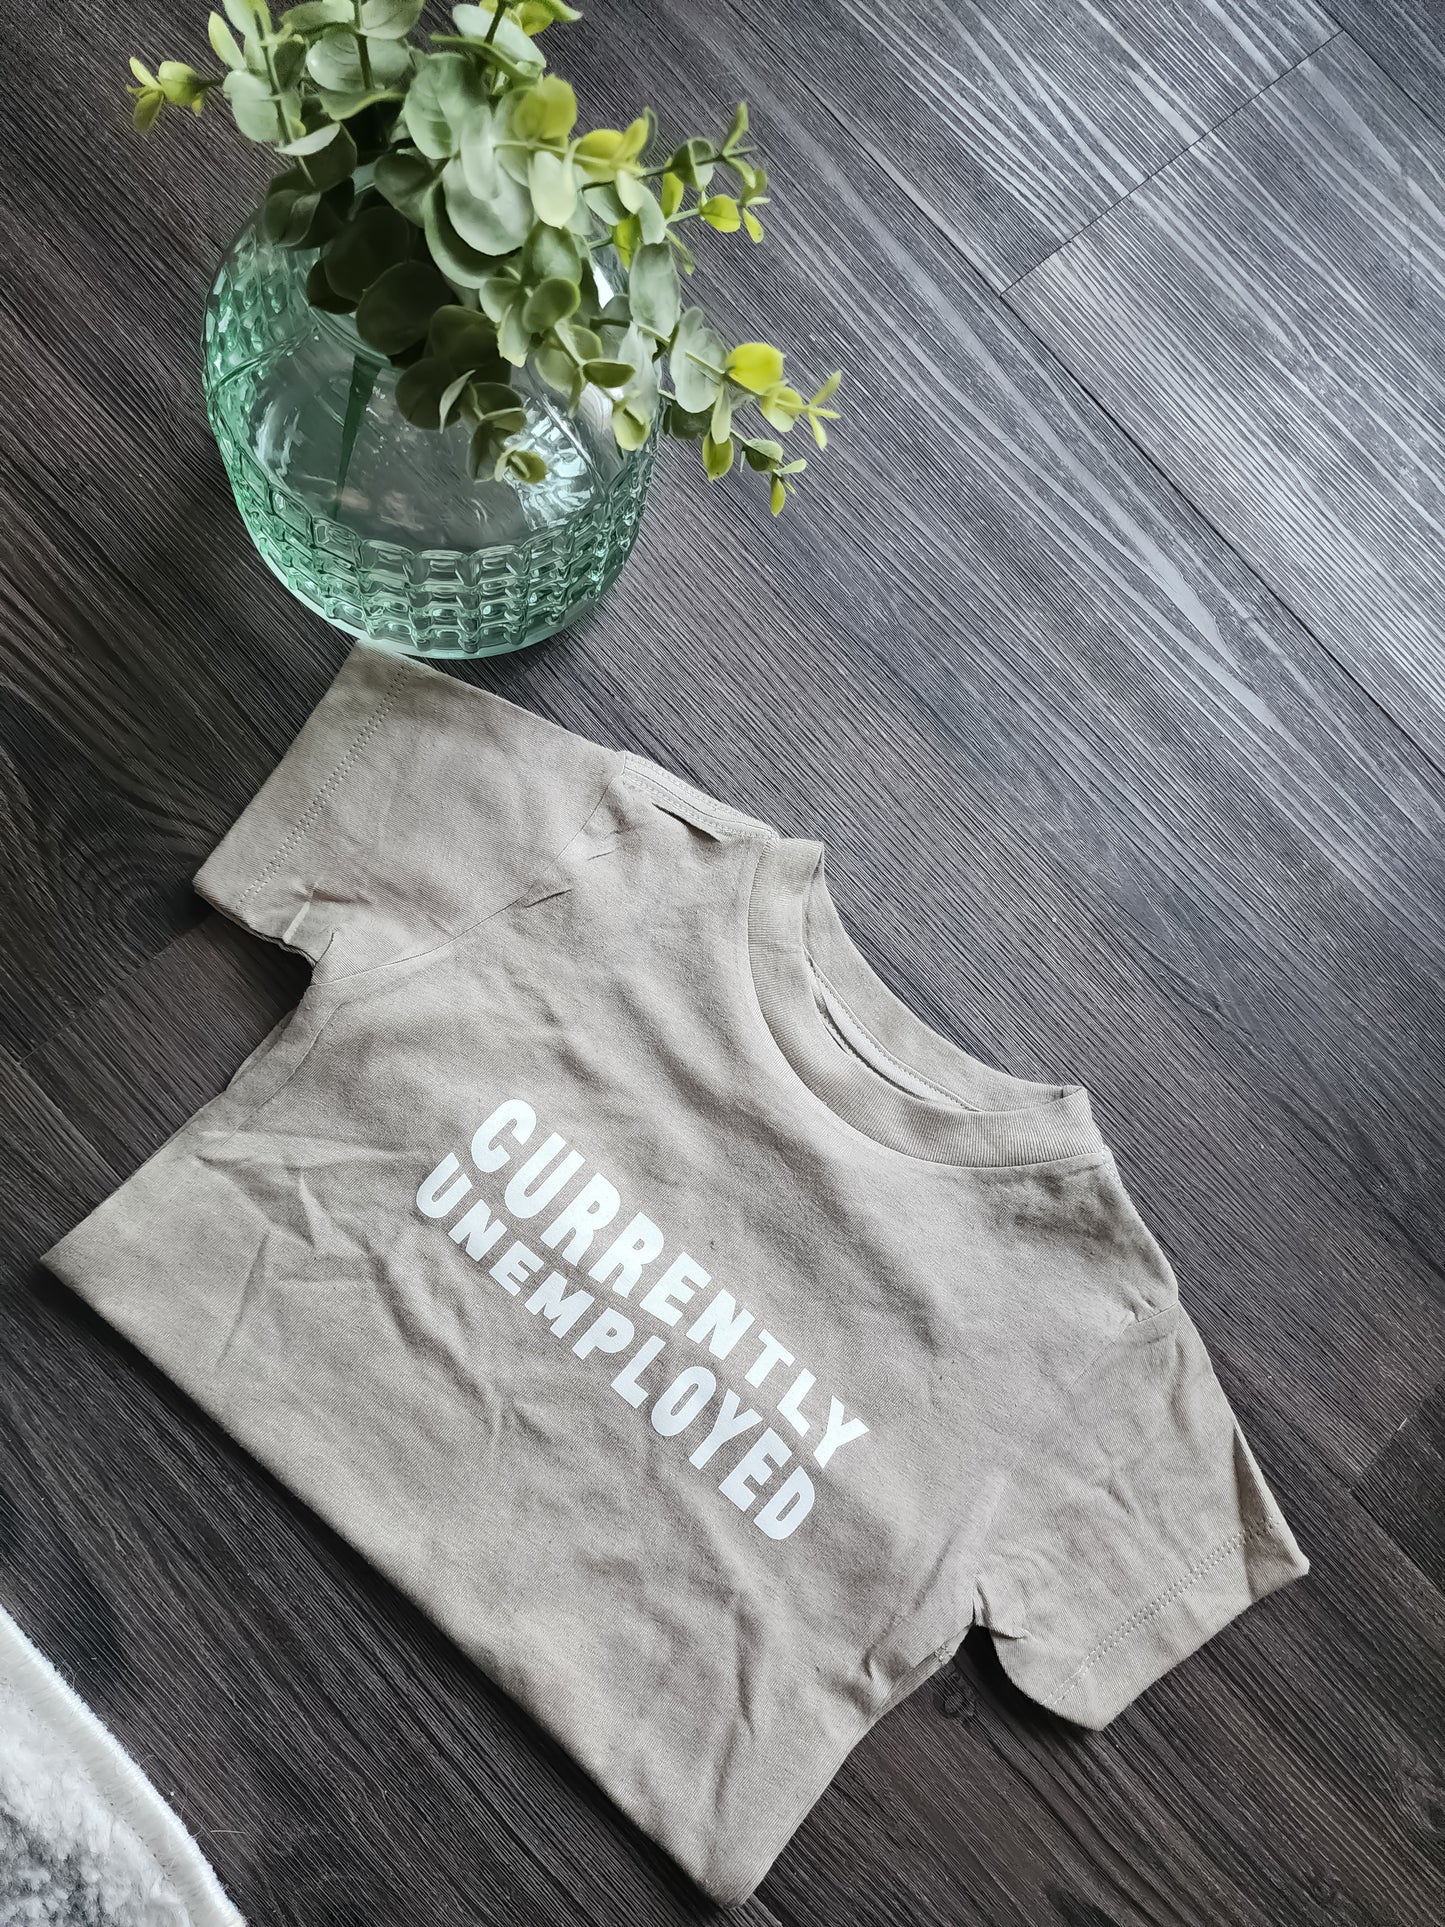 Currently Unemployed Kid Tee